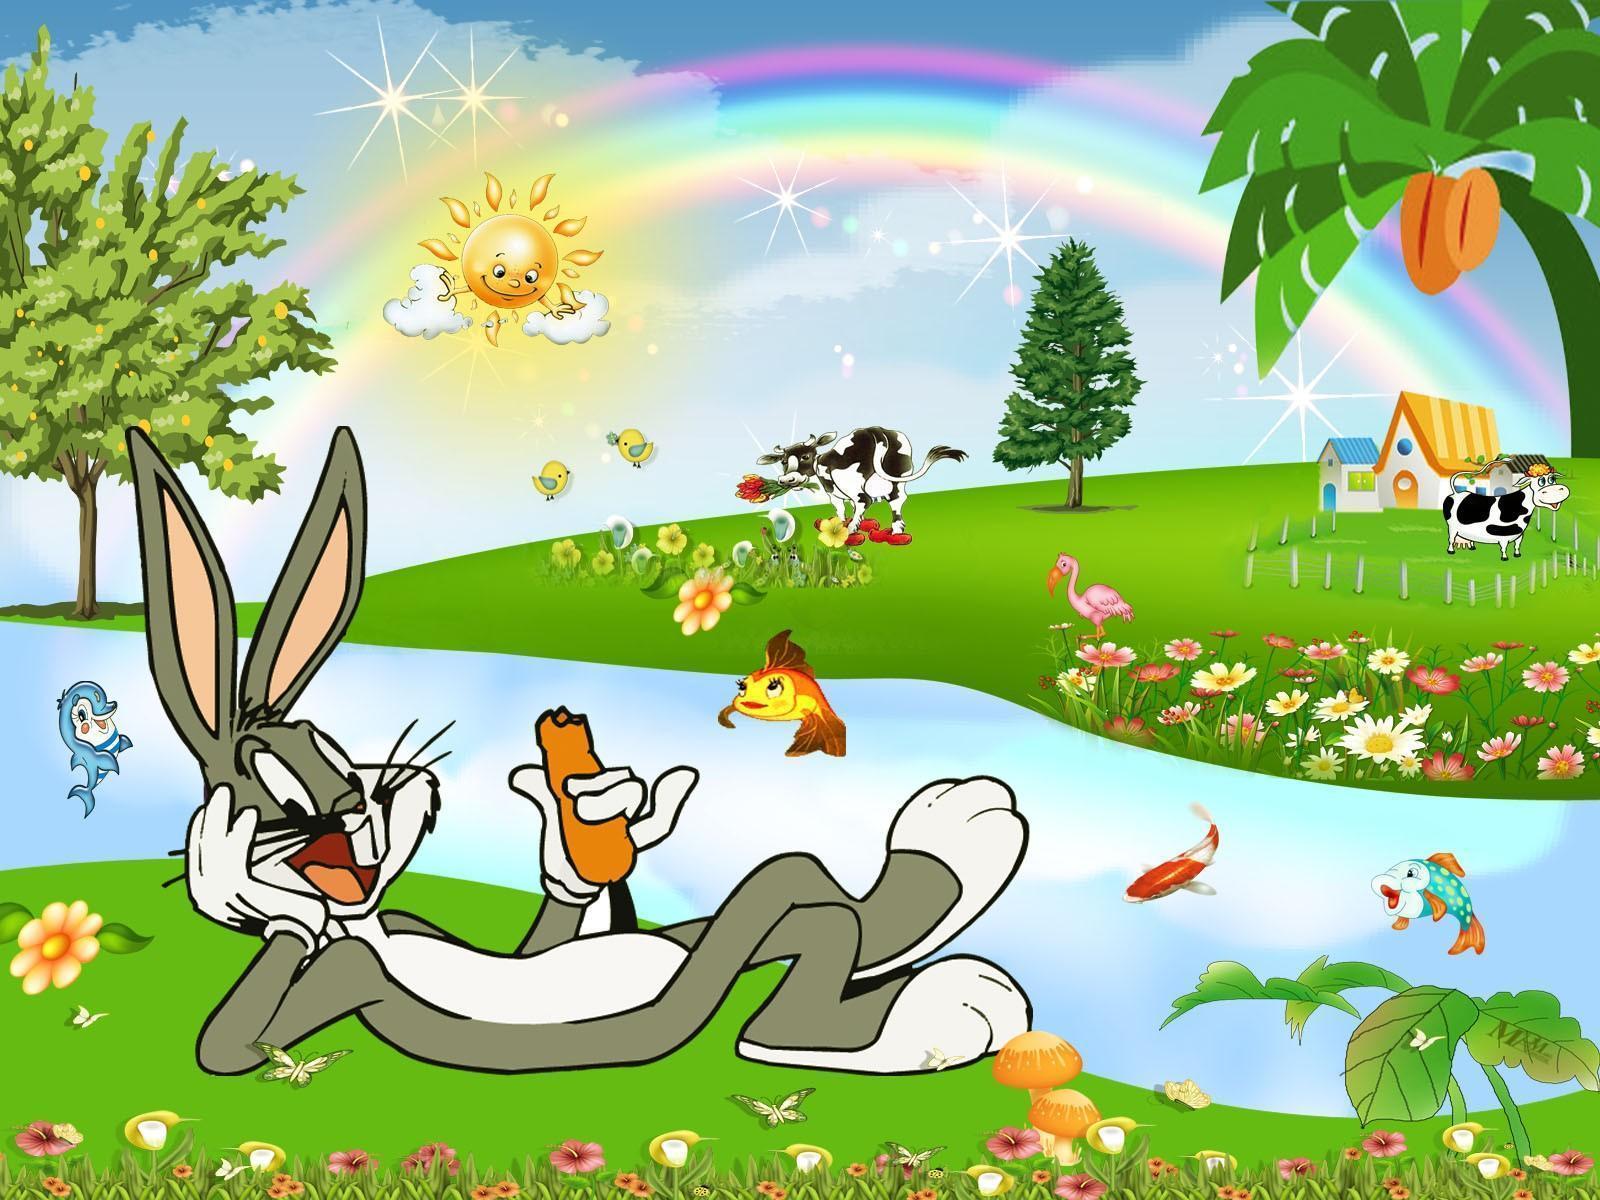 Bugs Bunny Backgrounds - Wallpaper Cave